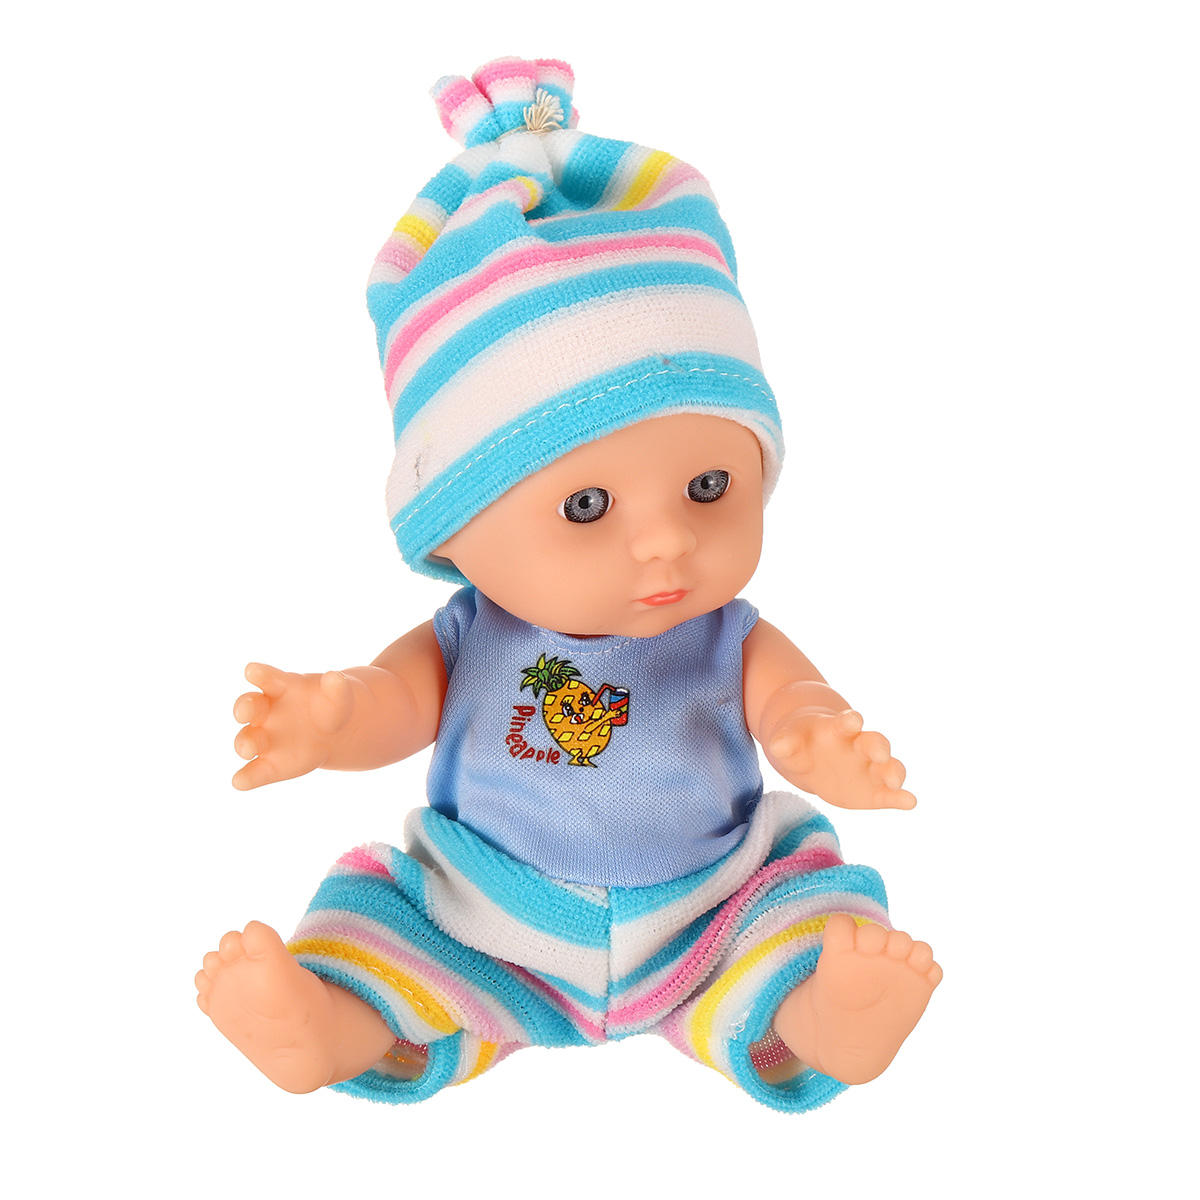 Simulation-Baby-3D-Creative-Cute-Doll-Play-House-Toy-Doll-Vinyl-Doll-Gift-1818655-21